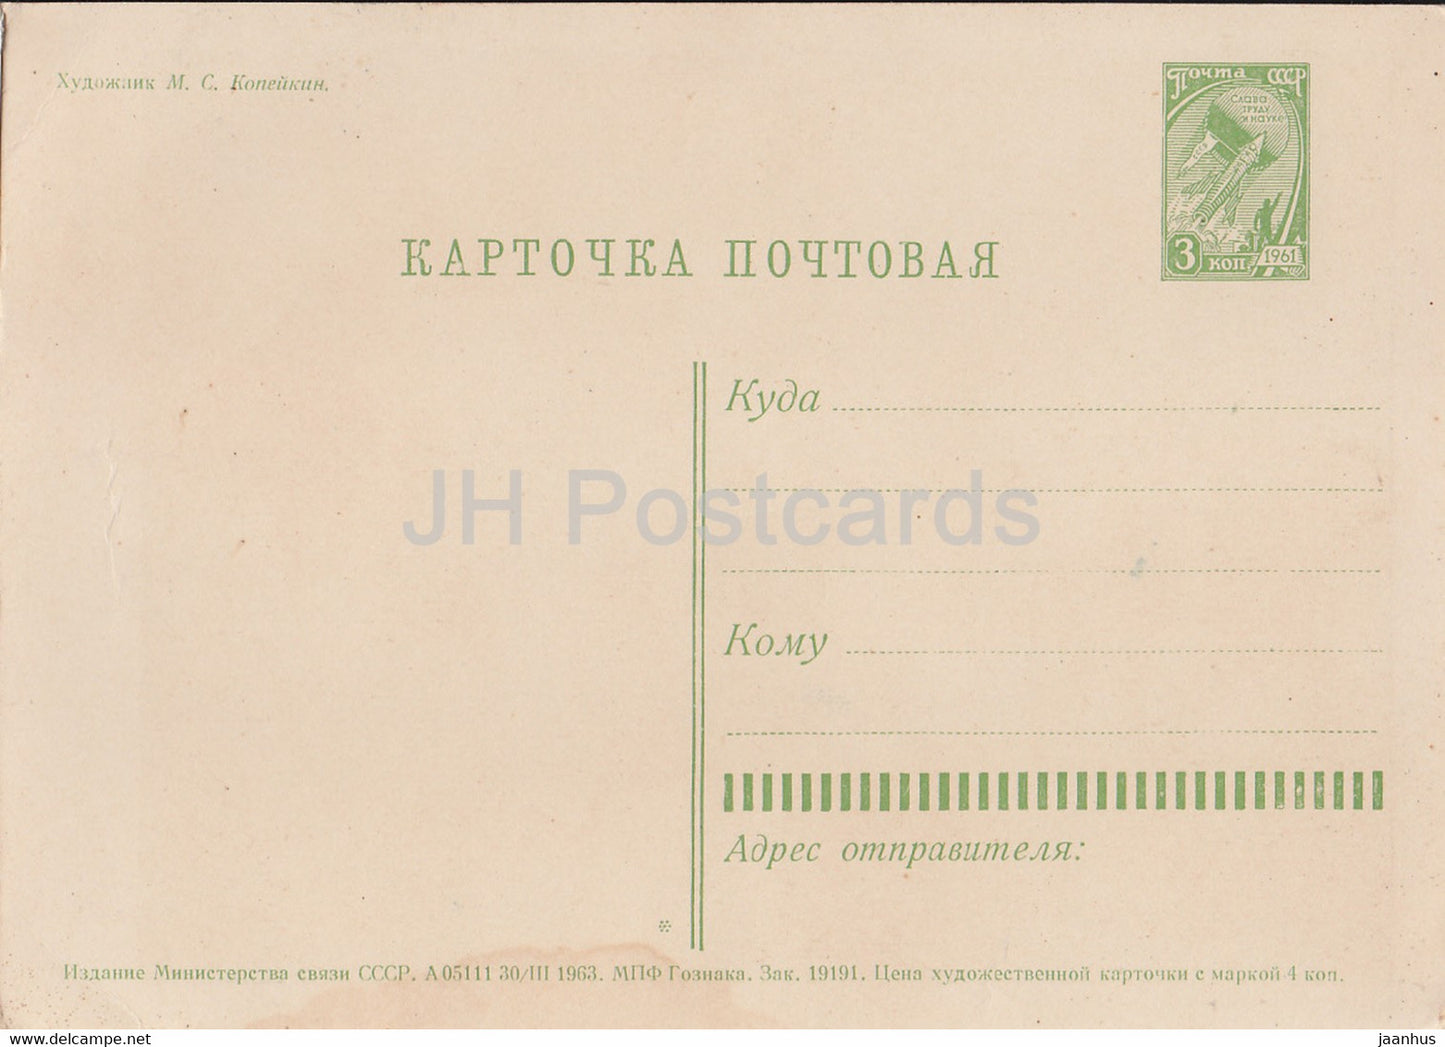 painting by M. Kopeykin - Lilac in the Vase - Russian art - postal stationery - 1963 - Russia DDR - unused